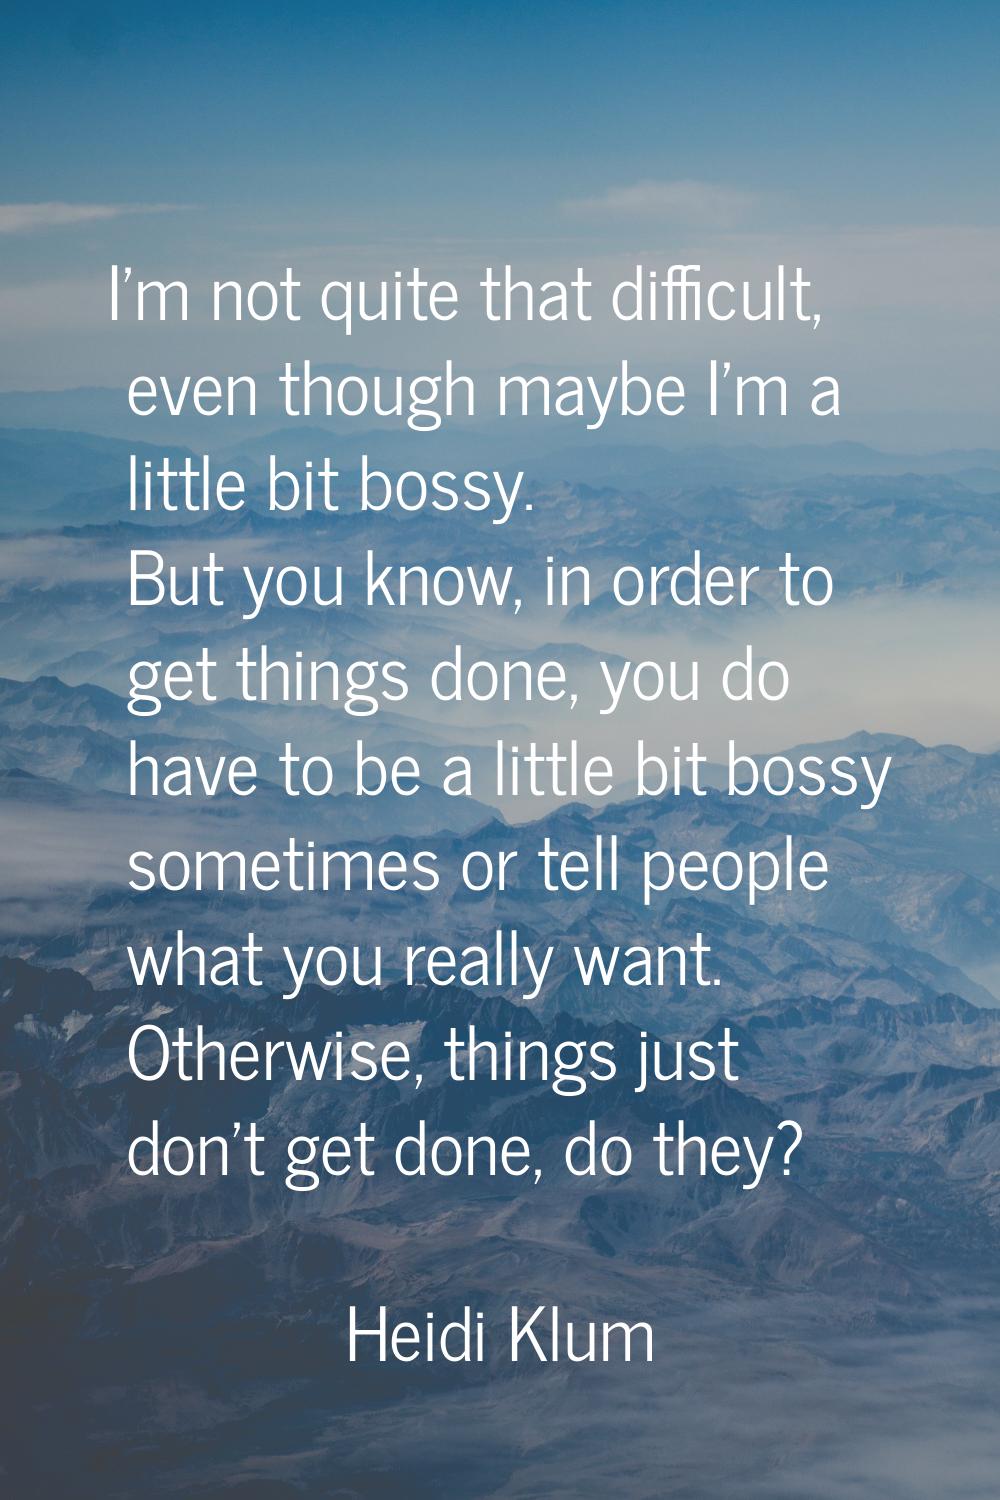 I'm not quite that difficult, even though maybe I'm a little bit bossy. But you know, in order to g